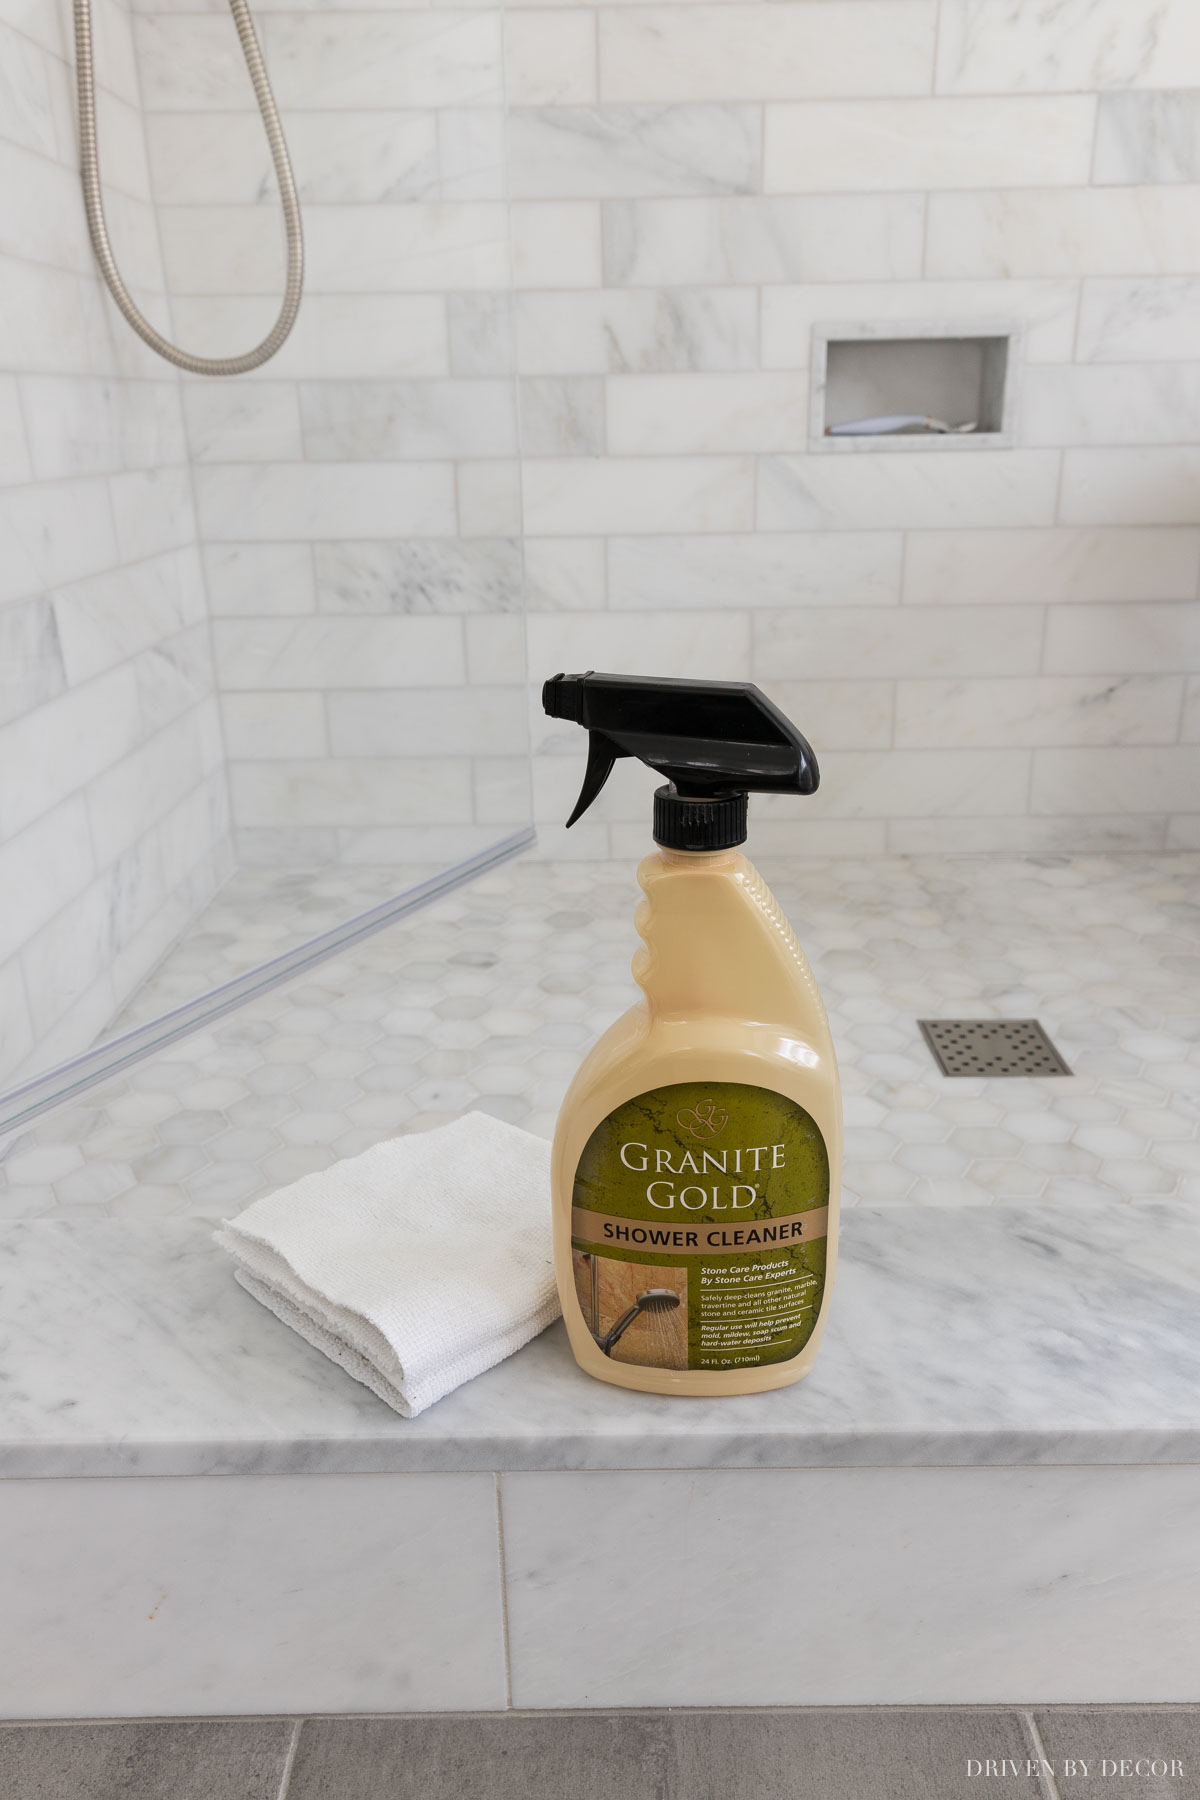 What to Avoid When it Comes to Proper Tile Cleaning